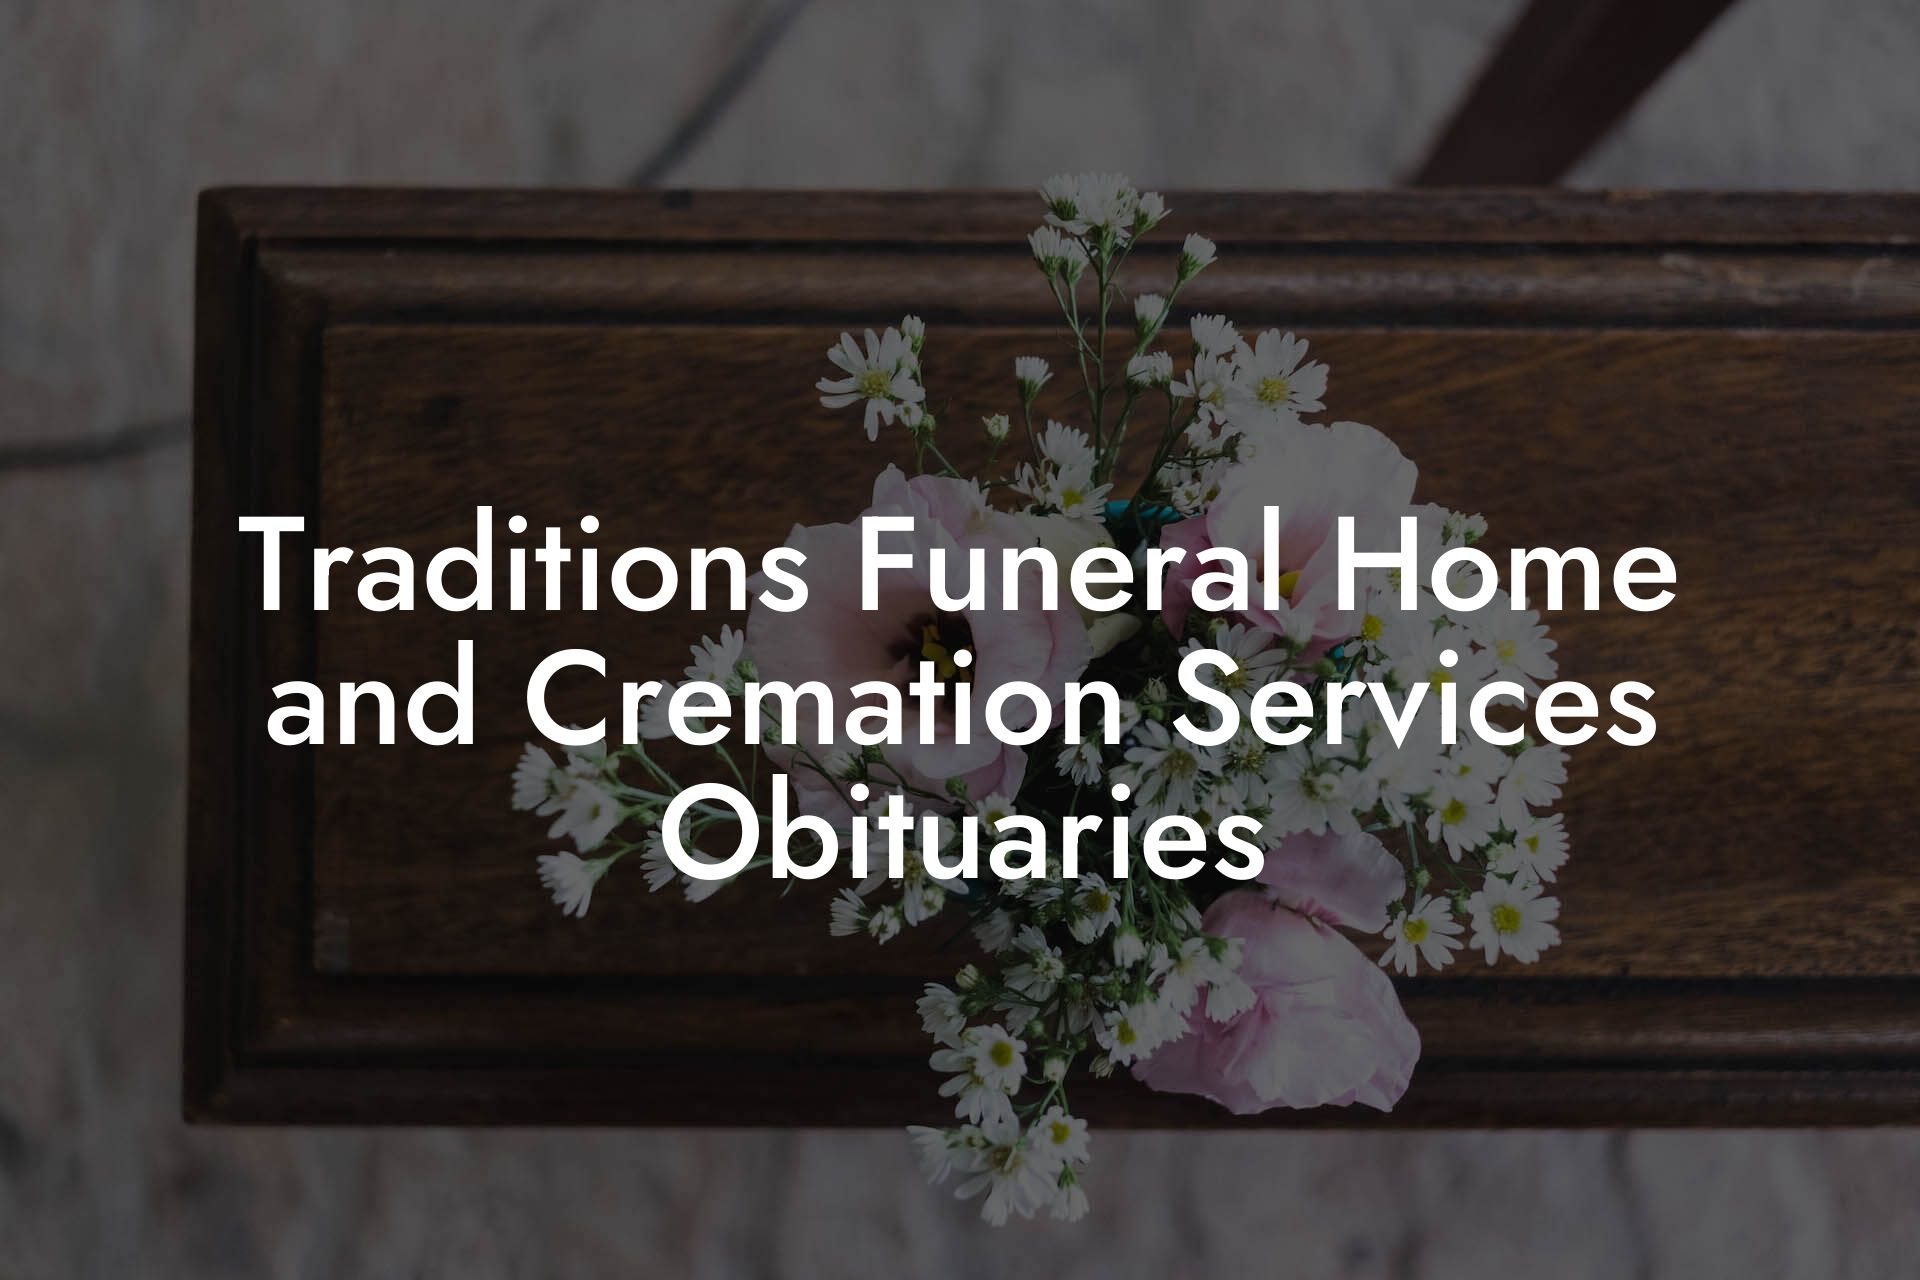 Traditions Funeral Home and Cremation Services Obituaries - Eulogy ...